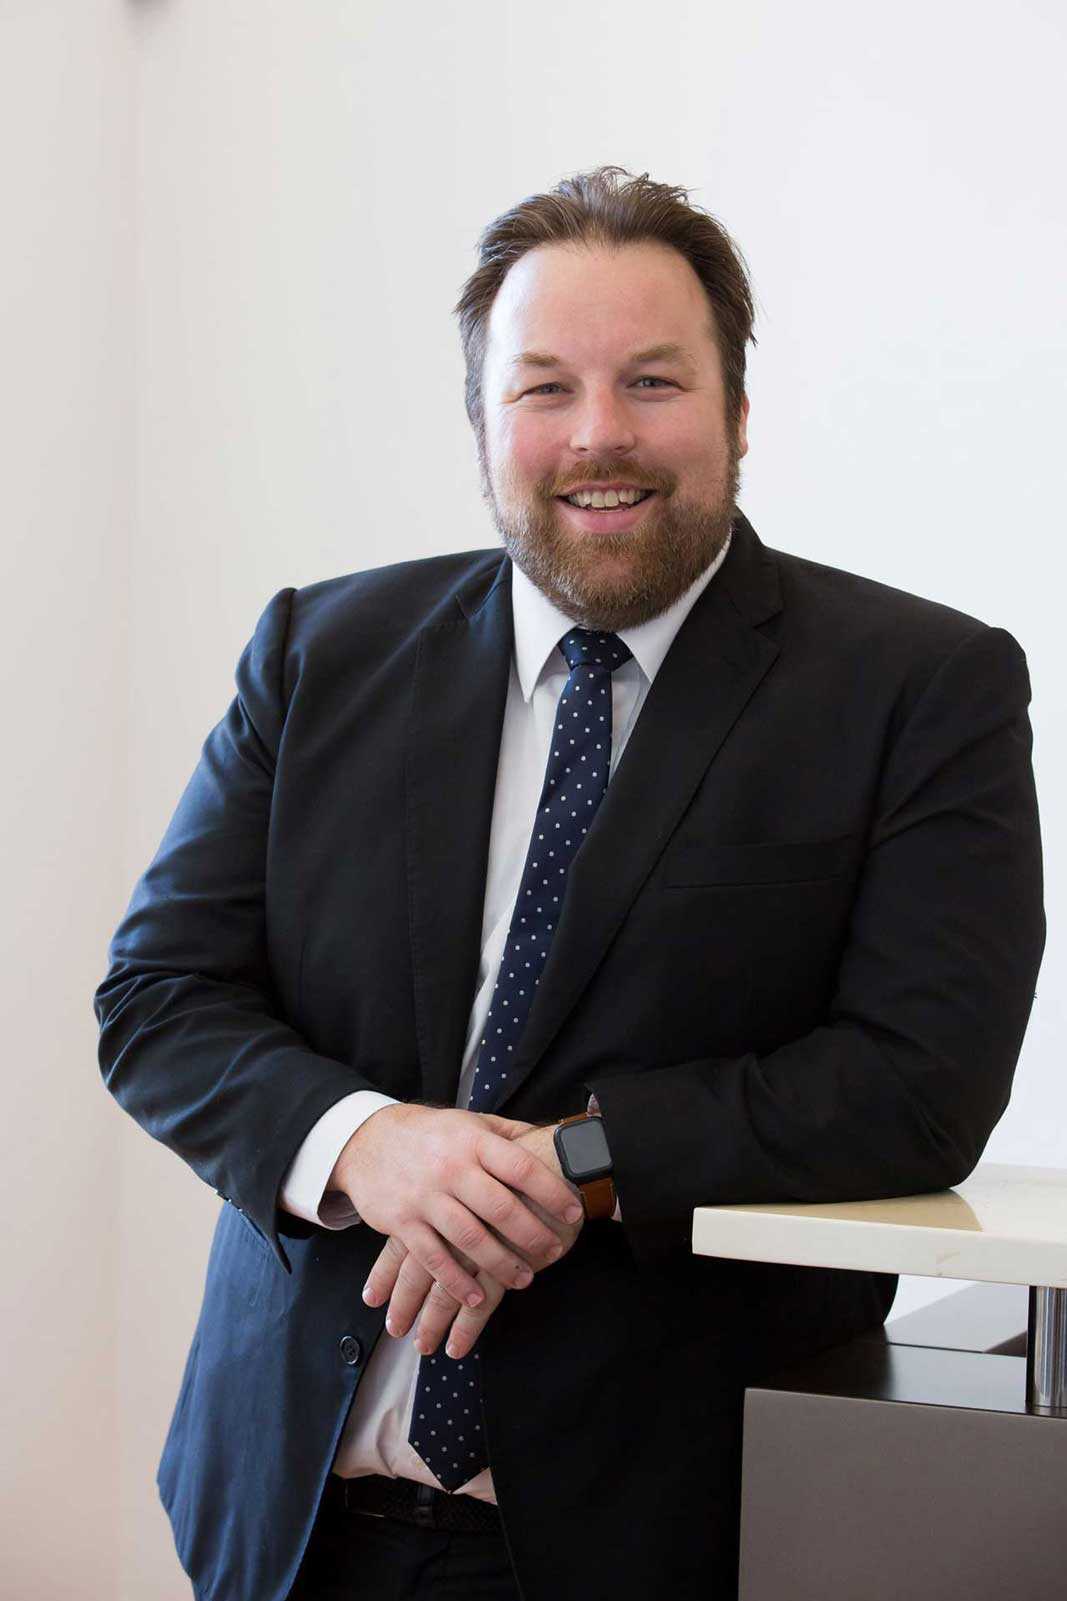 Mark Williams specialist in traffic, estate and criminal law